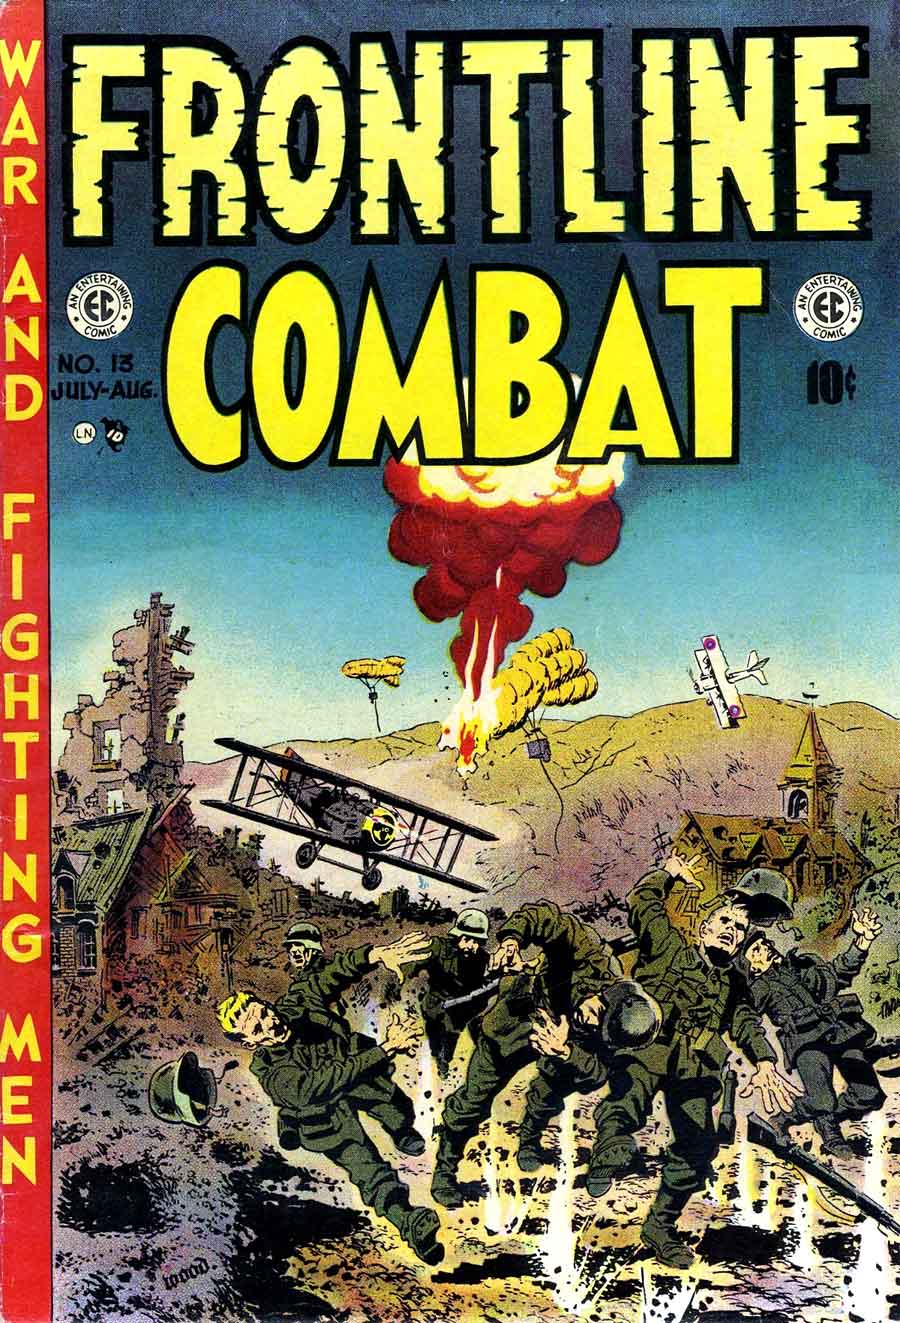 Frontline Combat v1 #13 ec golden age comic book cover art by Wally Wood